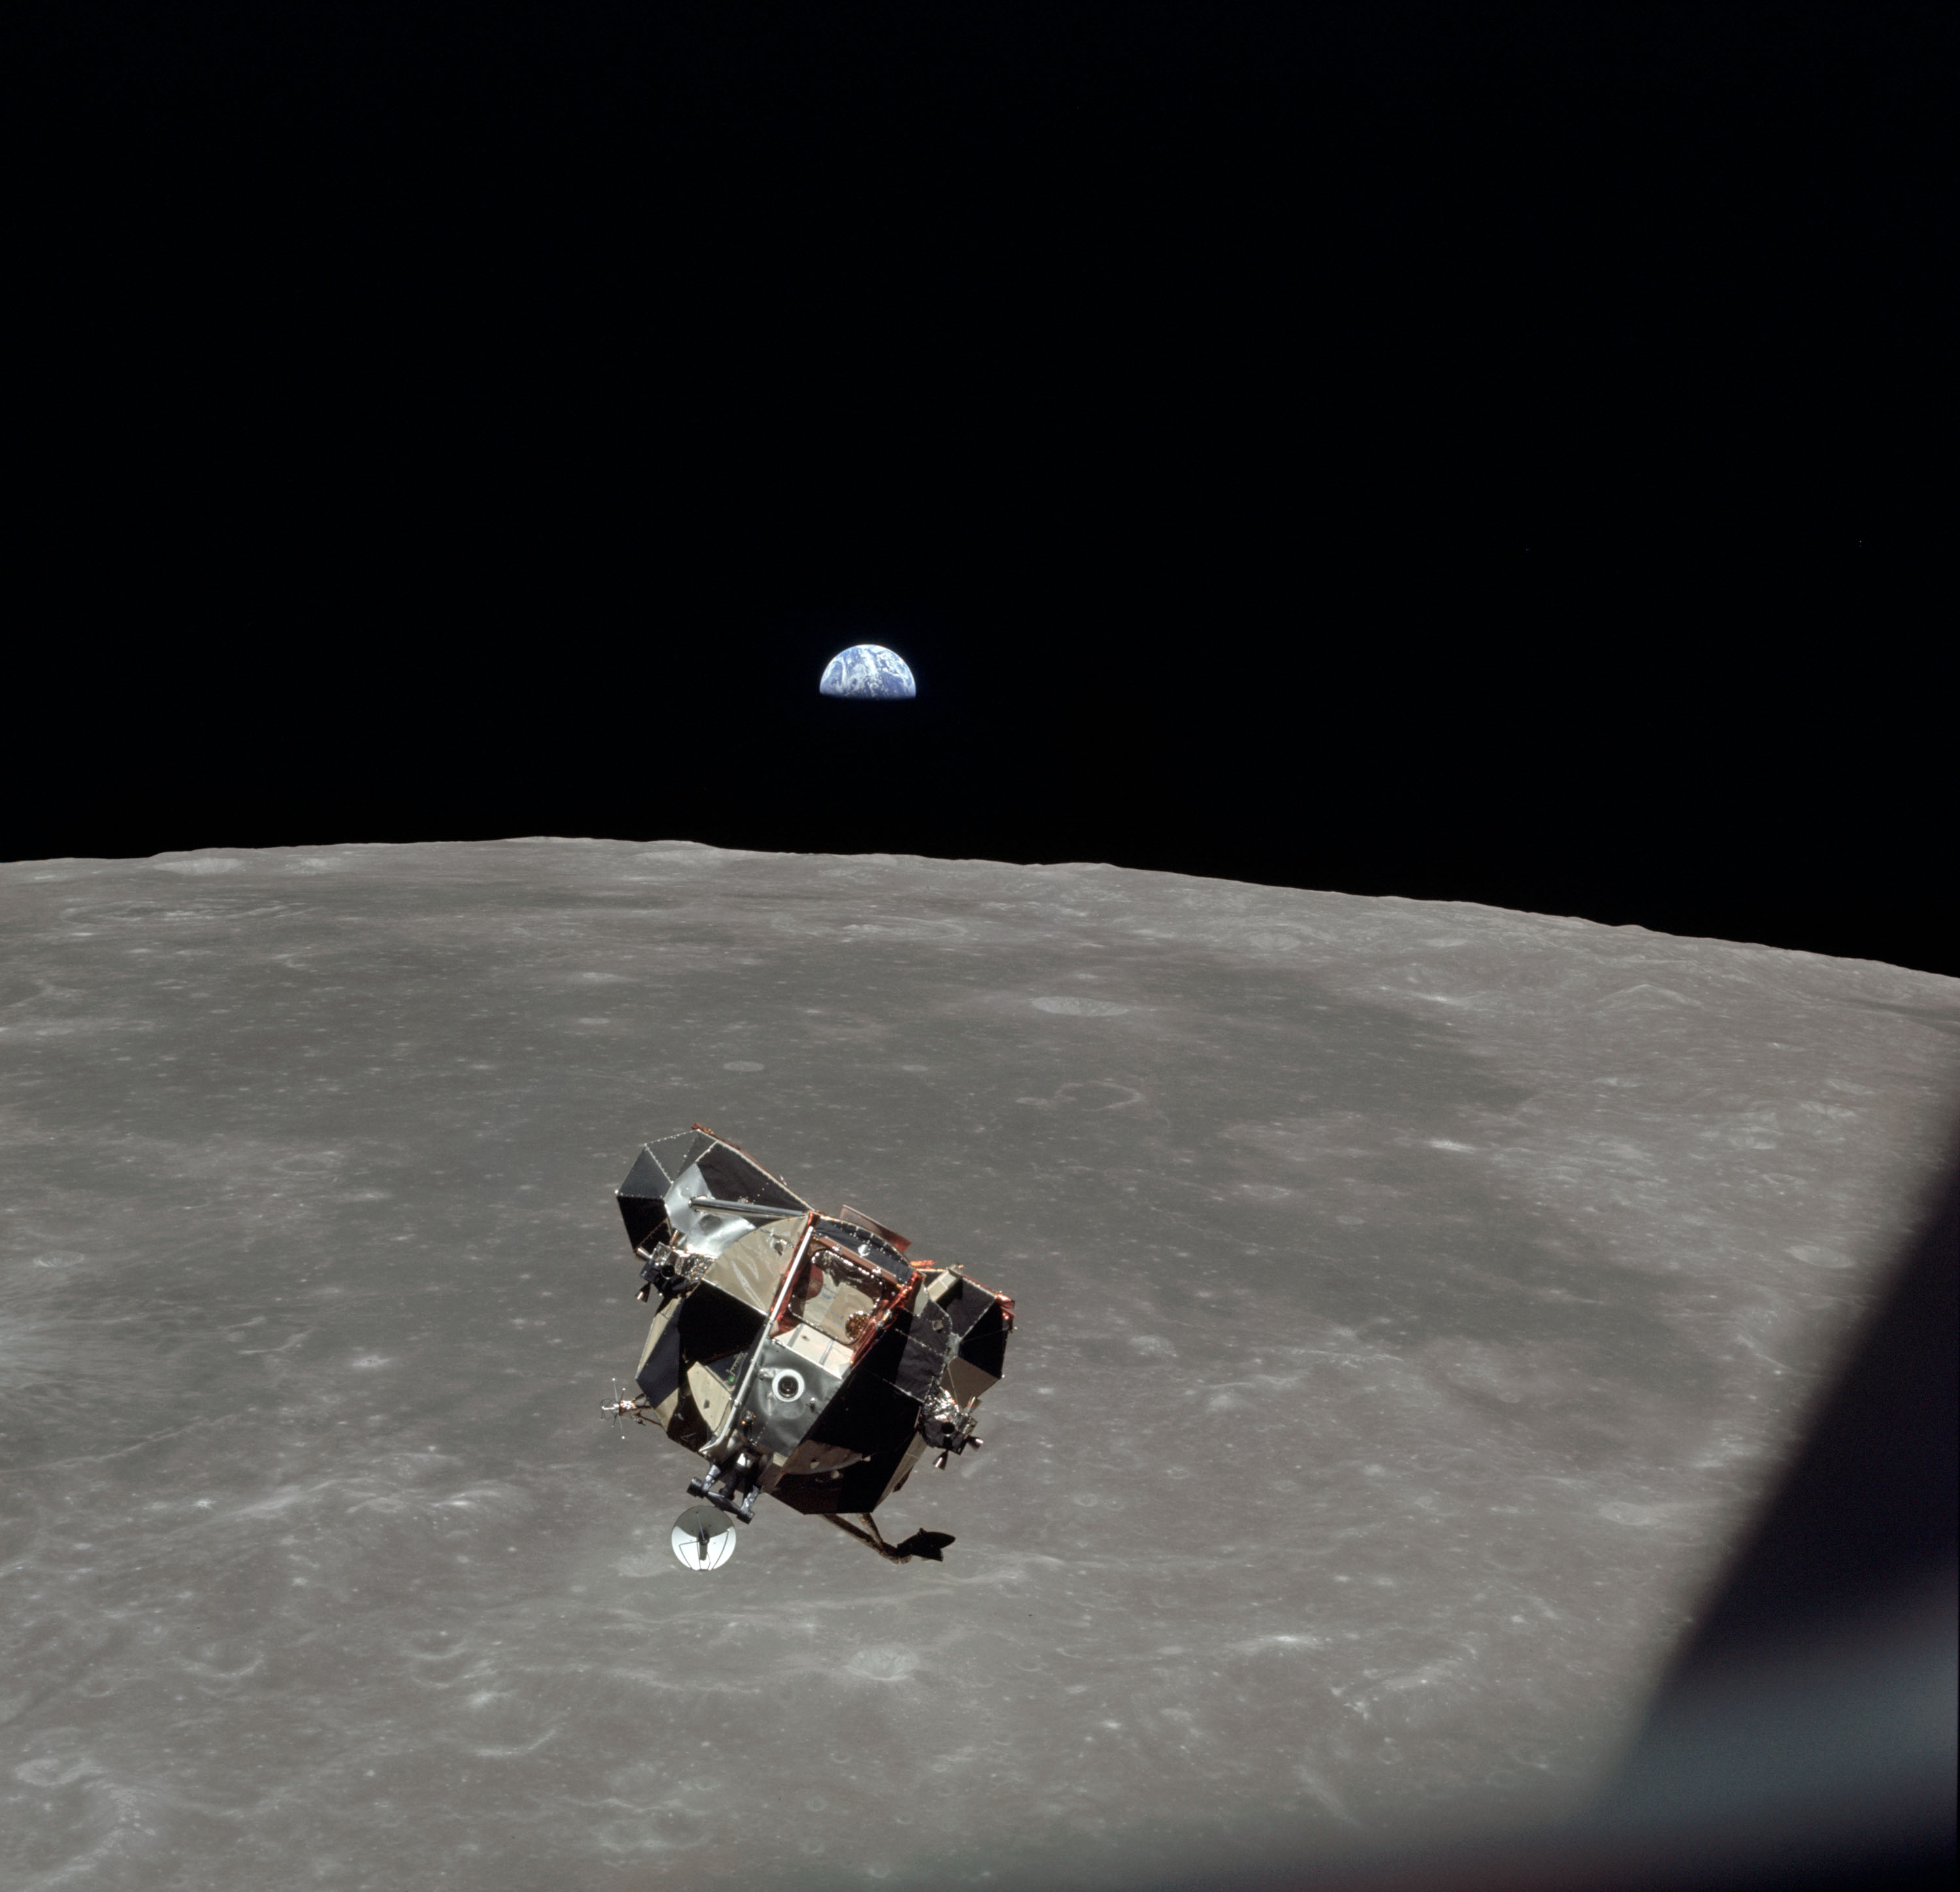 The Eagle lunar module descends to the lunar surface as part of the Apollo 11 mission on July 20, 1969.